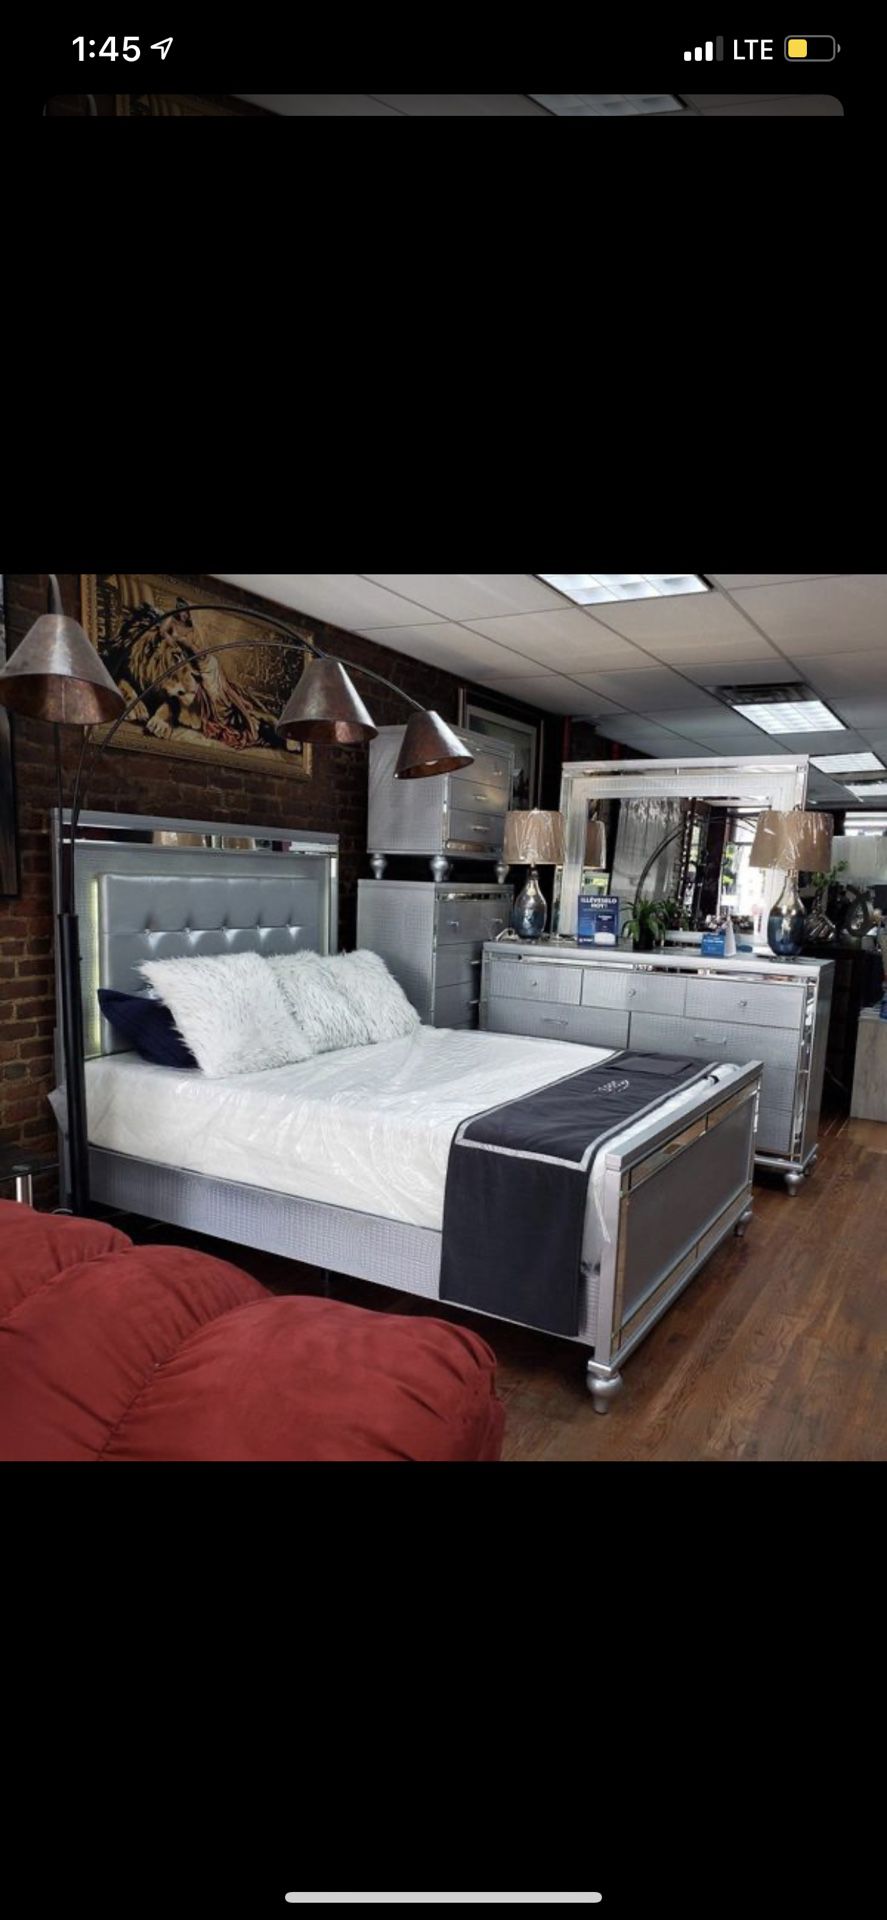 Brand New Complete Bedroom Set With Orthopedic Mattress For $1499